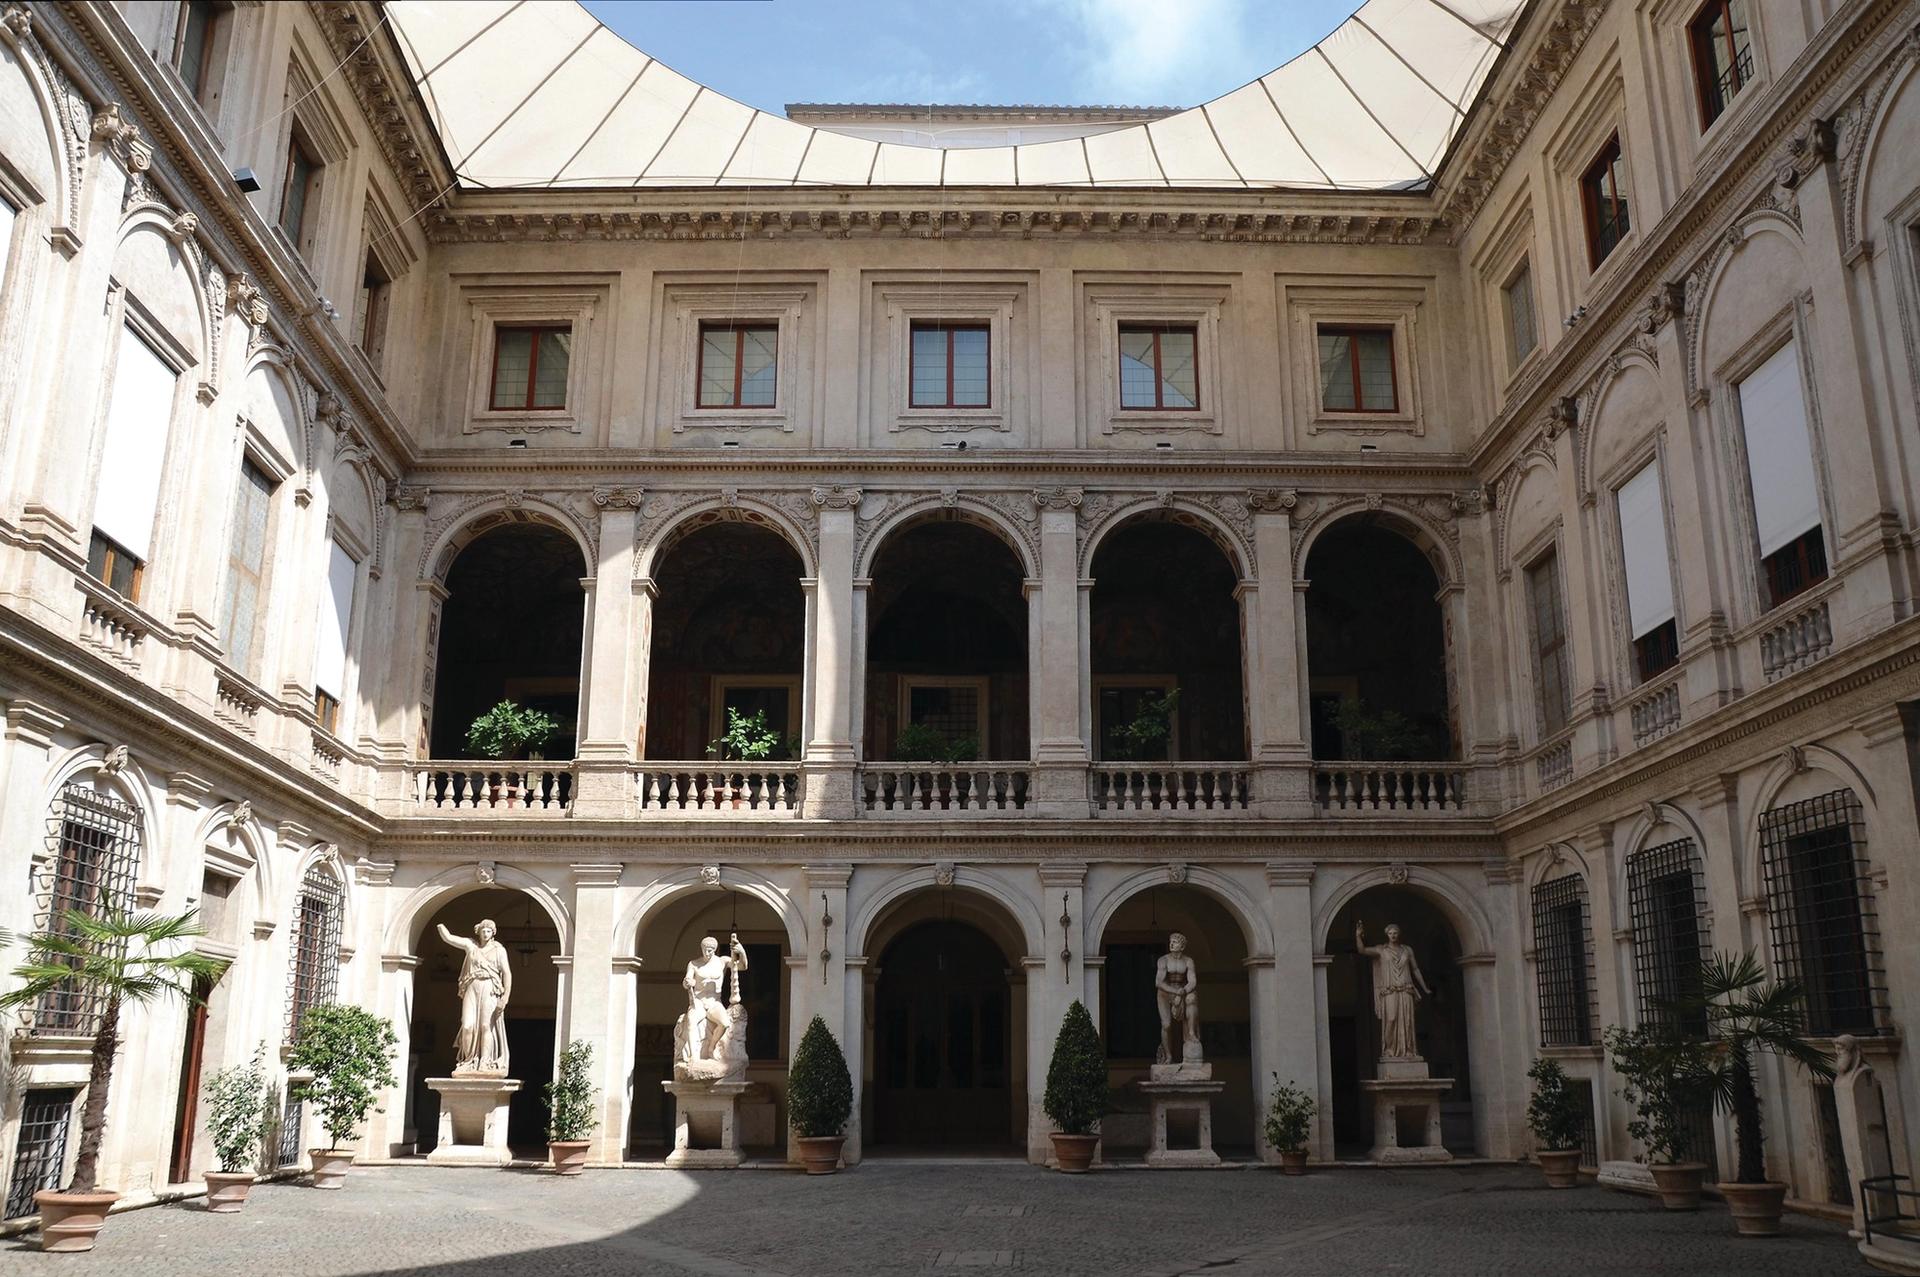 Rome’s 15th-century Palazzo Altemps is one of the sites to be overhauled over the next four years. The museum will present a thematic itinerary from antiquity through to the Renaissance and Baroque periods, and a new display of 17th-century sculpture from the Boncompagni Ludovisi collection

© Carole Raddato